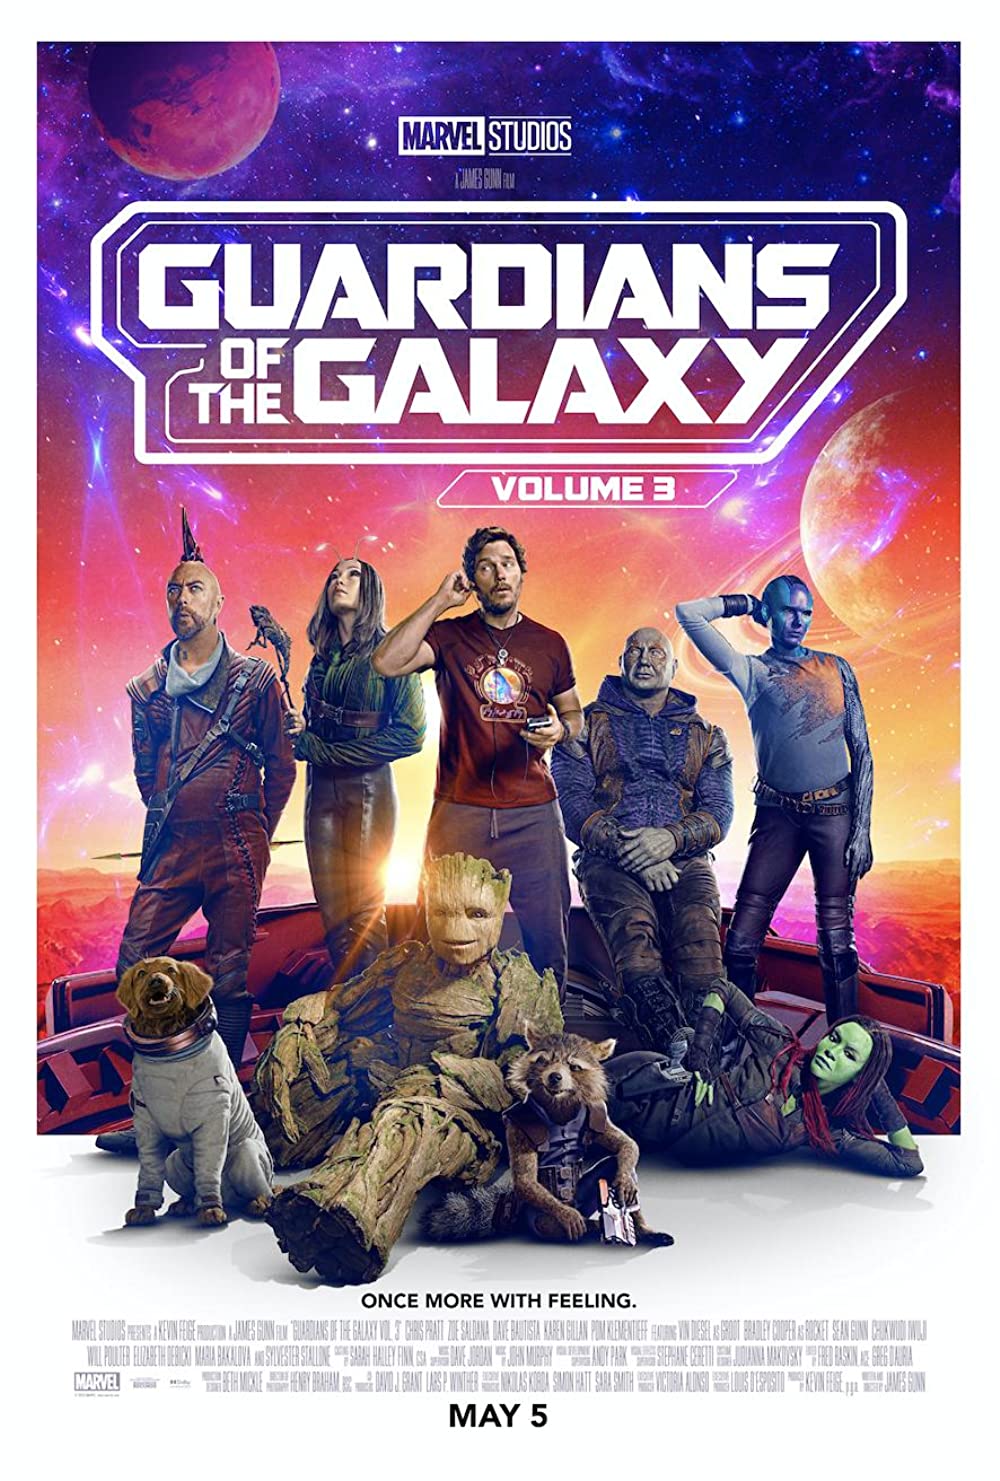 Guardians of the Galazy